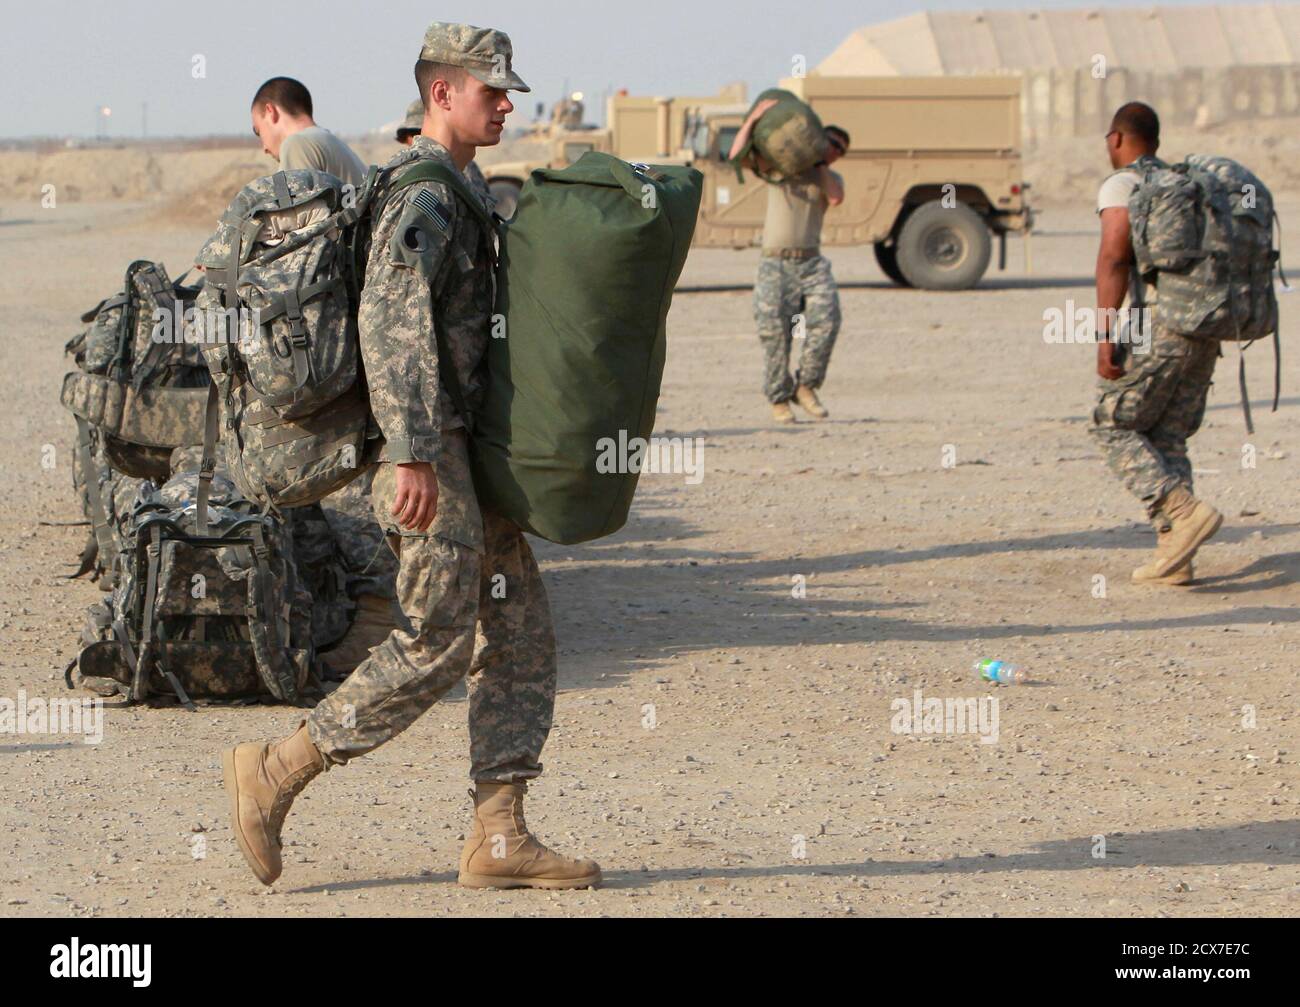 U.S. soldiers from the 1st Battalion, 116th Infantry Regiment, carry their luggage as they prepare to pull out from Iraq to Kuwait, at Tallil Air Base near Nassiriya, 300 km (185 miles) southeast of Baghdad, August 15, 2010. Picture taken August 15, 2010.  REUTERS/Thaier al-Sudani (IRAQ - Tags: CONFLICT SOCIETY) POLITICS MILITARY) Stock Photo